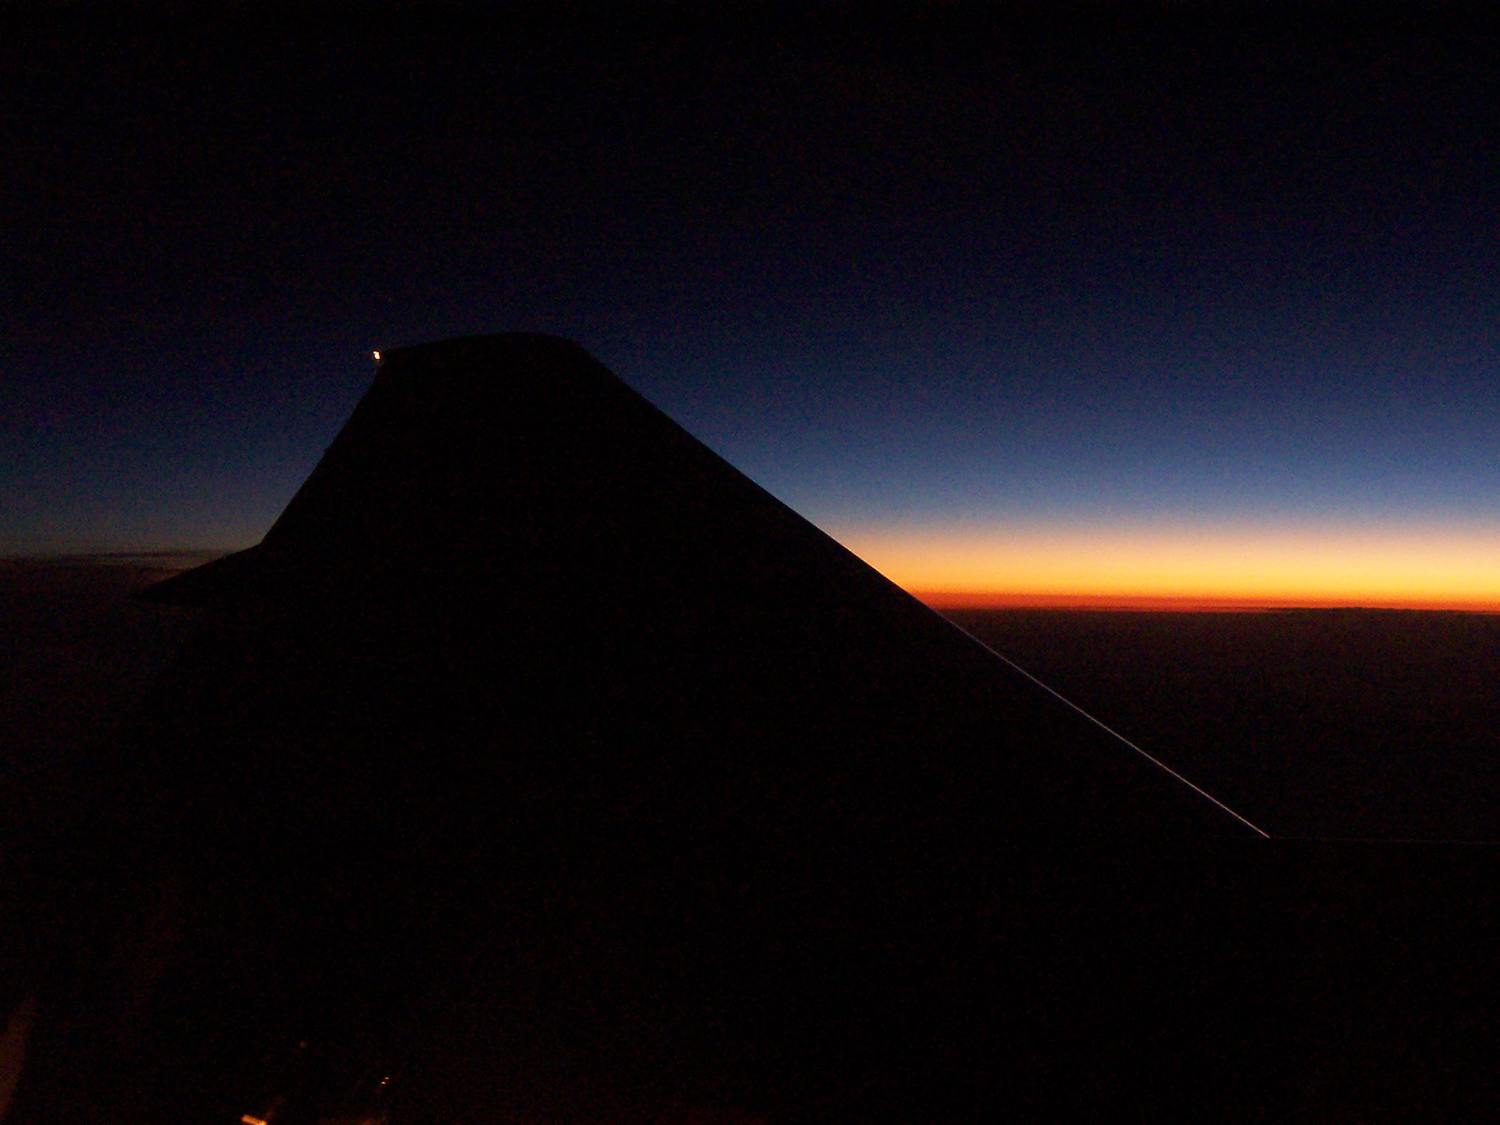    Sunset from the window of a plane   